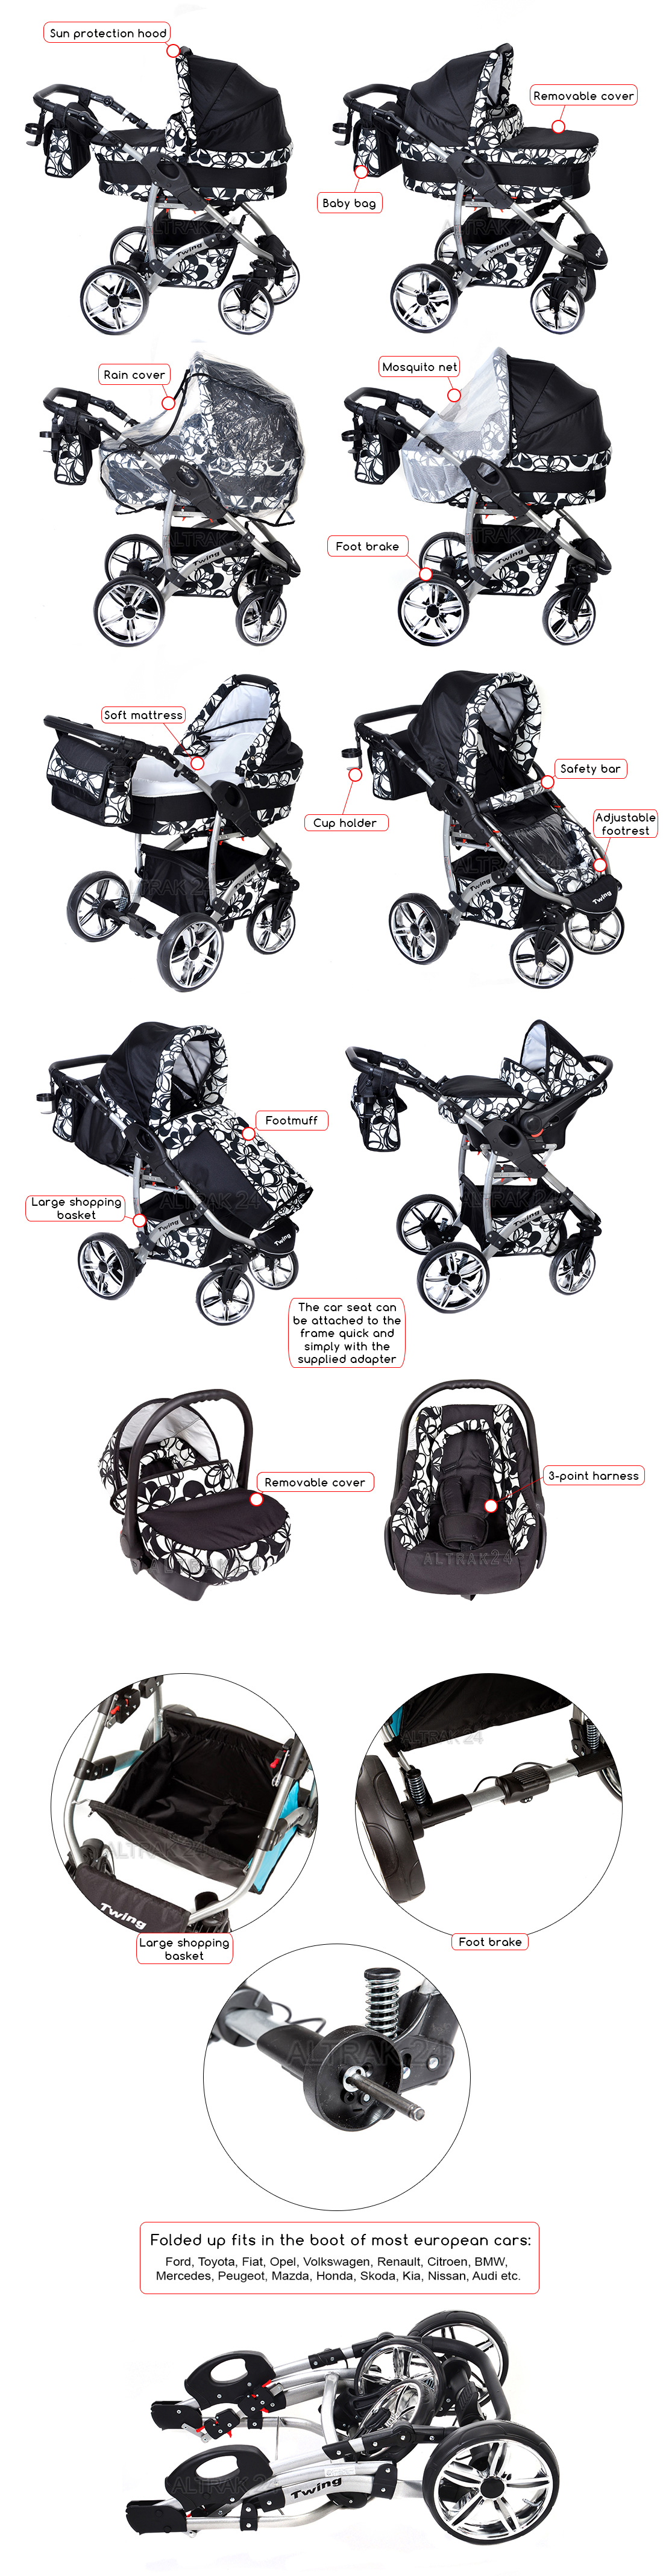 twing 3 in 1 travel system